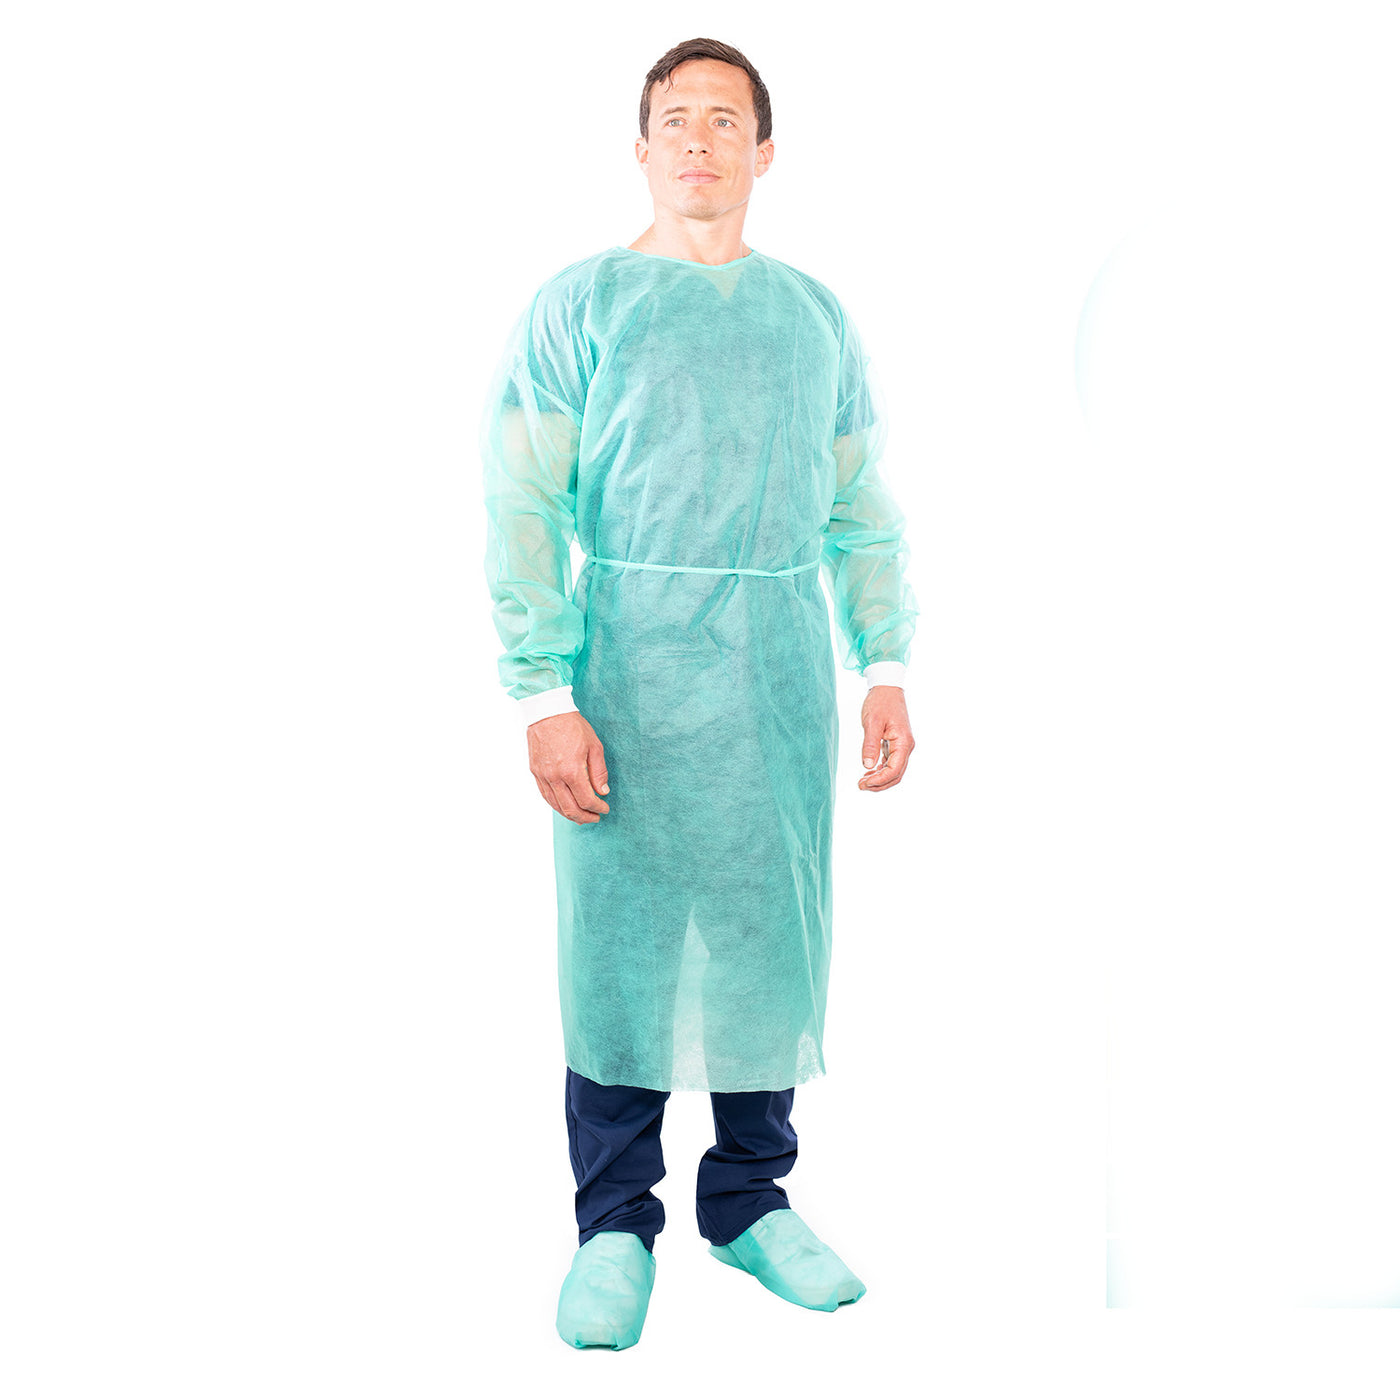 Green Disposable Isolation Gowns - Medical & PPE Gowns (Case of 50)